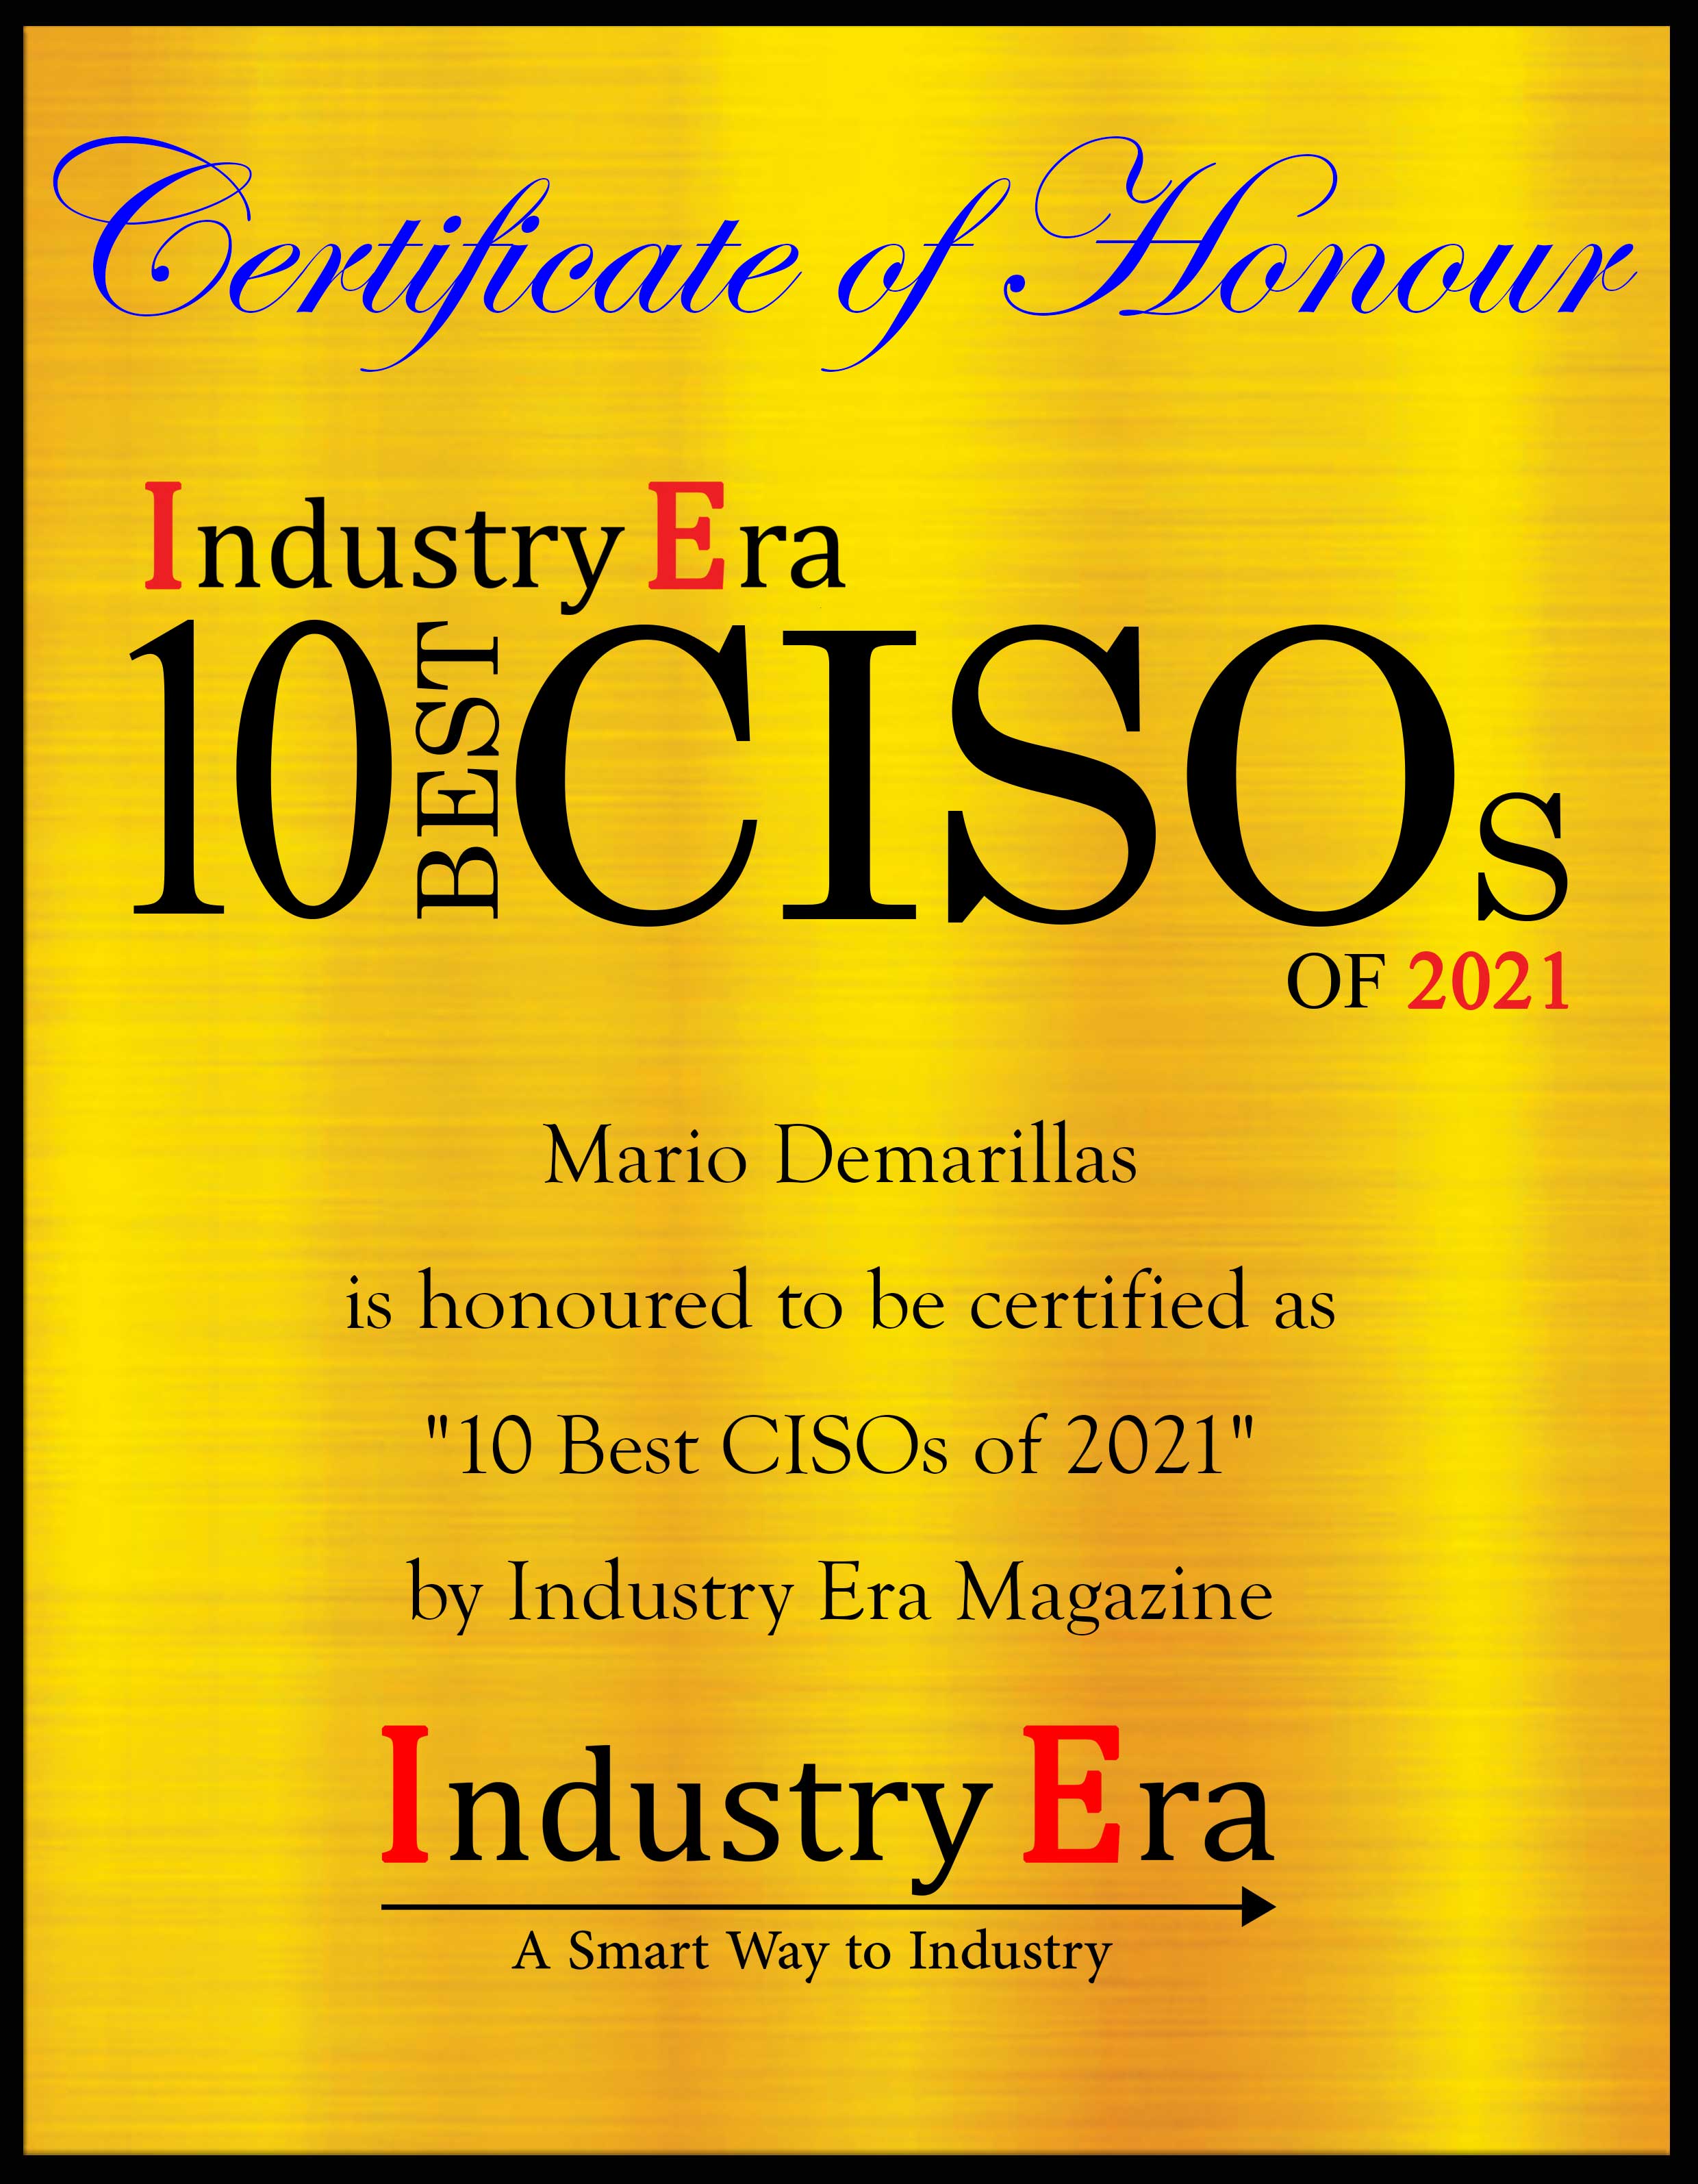 Mario Demarillas, Board of Director, CISO and Head of IT Consulting & Software Engineering of Exceture Inc Certificate